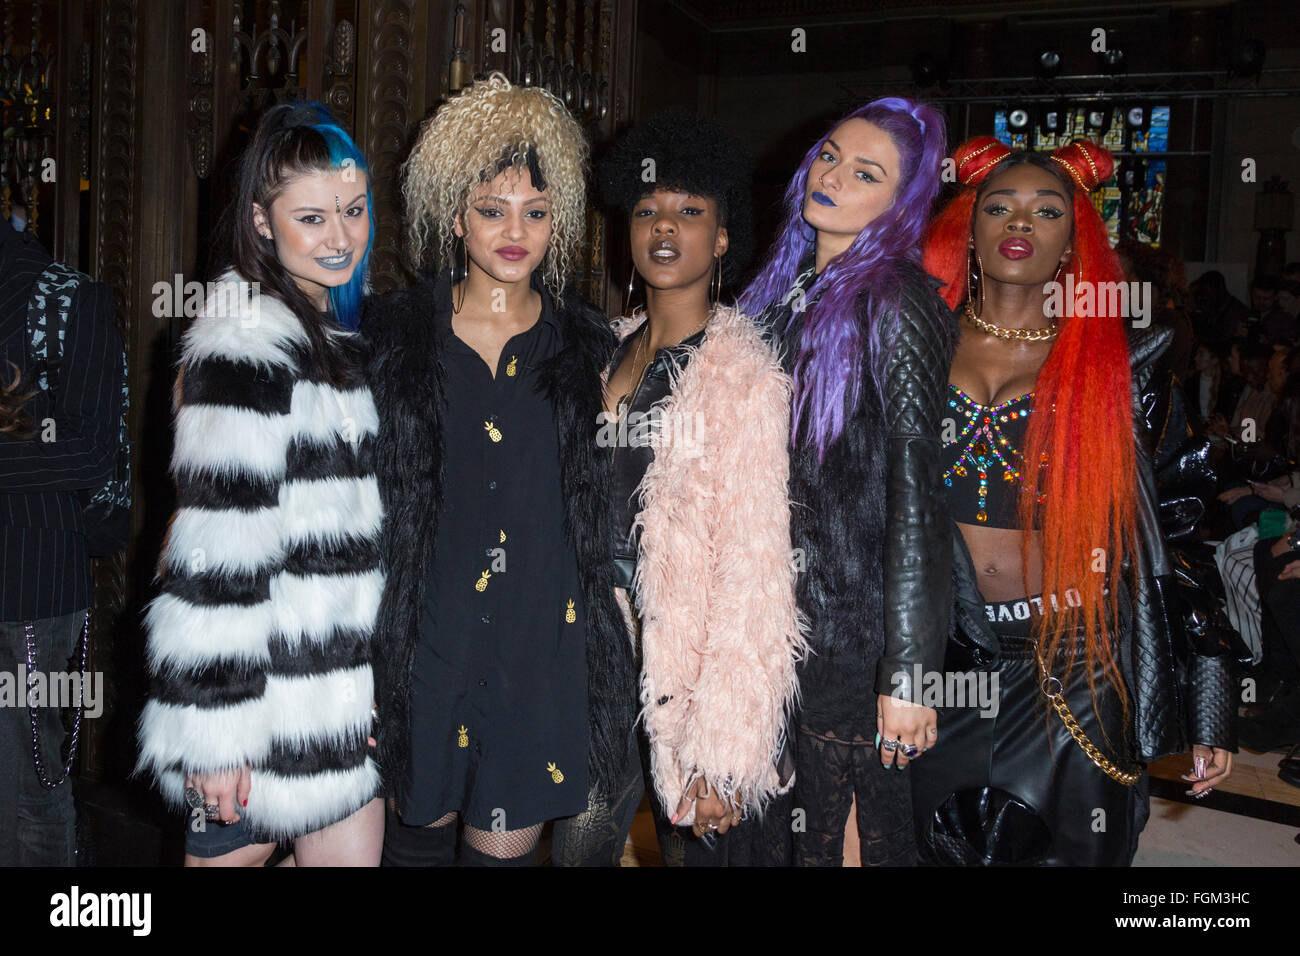 London, UK. 20 February 2016. Girl group Alien Uncovered attends the Ashley Isham AW16 runway show at Freemasons' Hall/Fashion Scout during London Fashion Week. Stock Photo